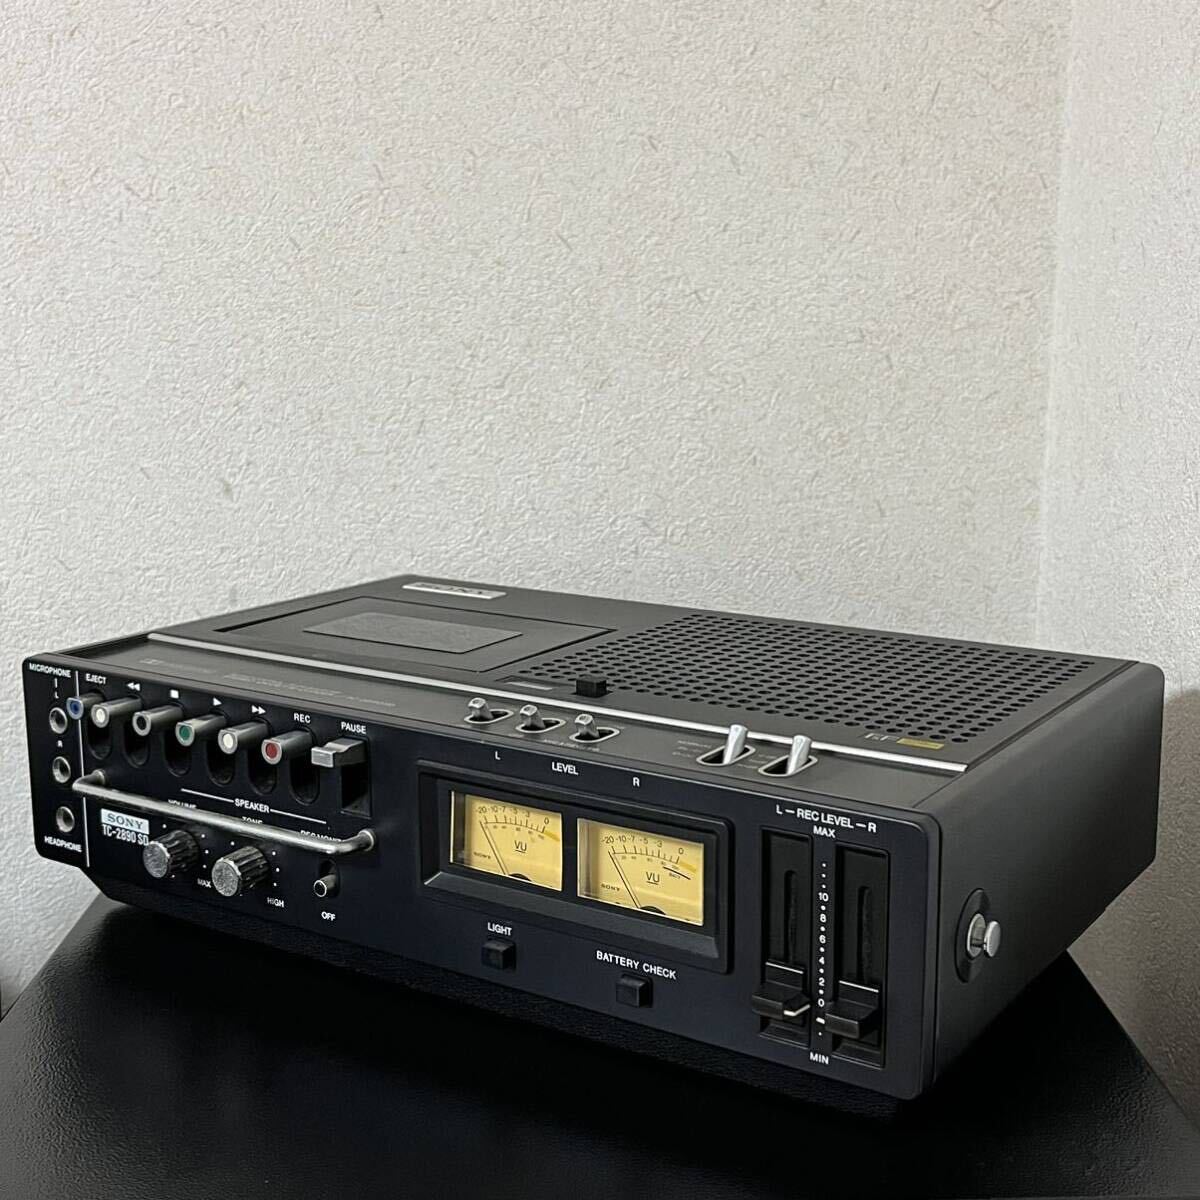 SONY STEREO CASSETE-CORDER TC-2890 SD DOLBY SYSTEM SERVO CONTROL / AUTO SHUT OFF ソニー カセットデンスケ ステレオテープレコーダーの画像2